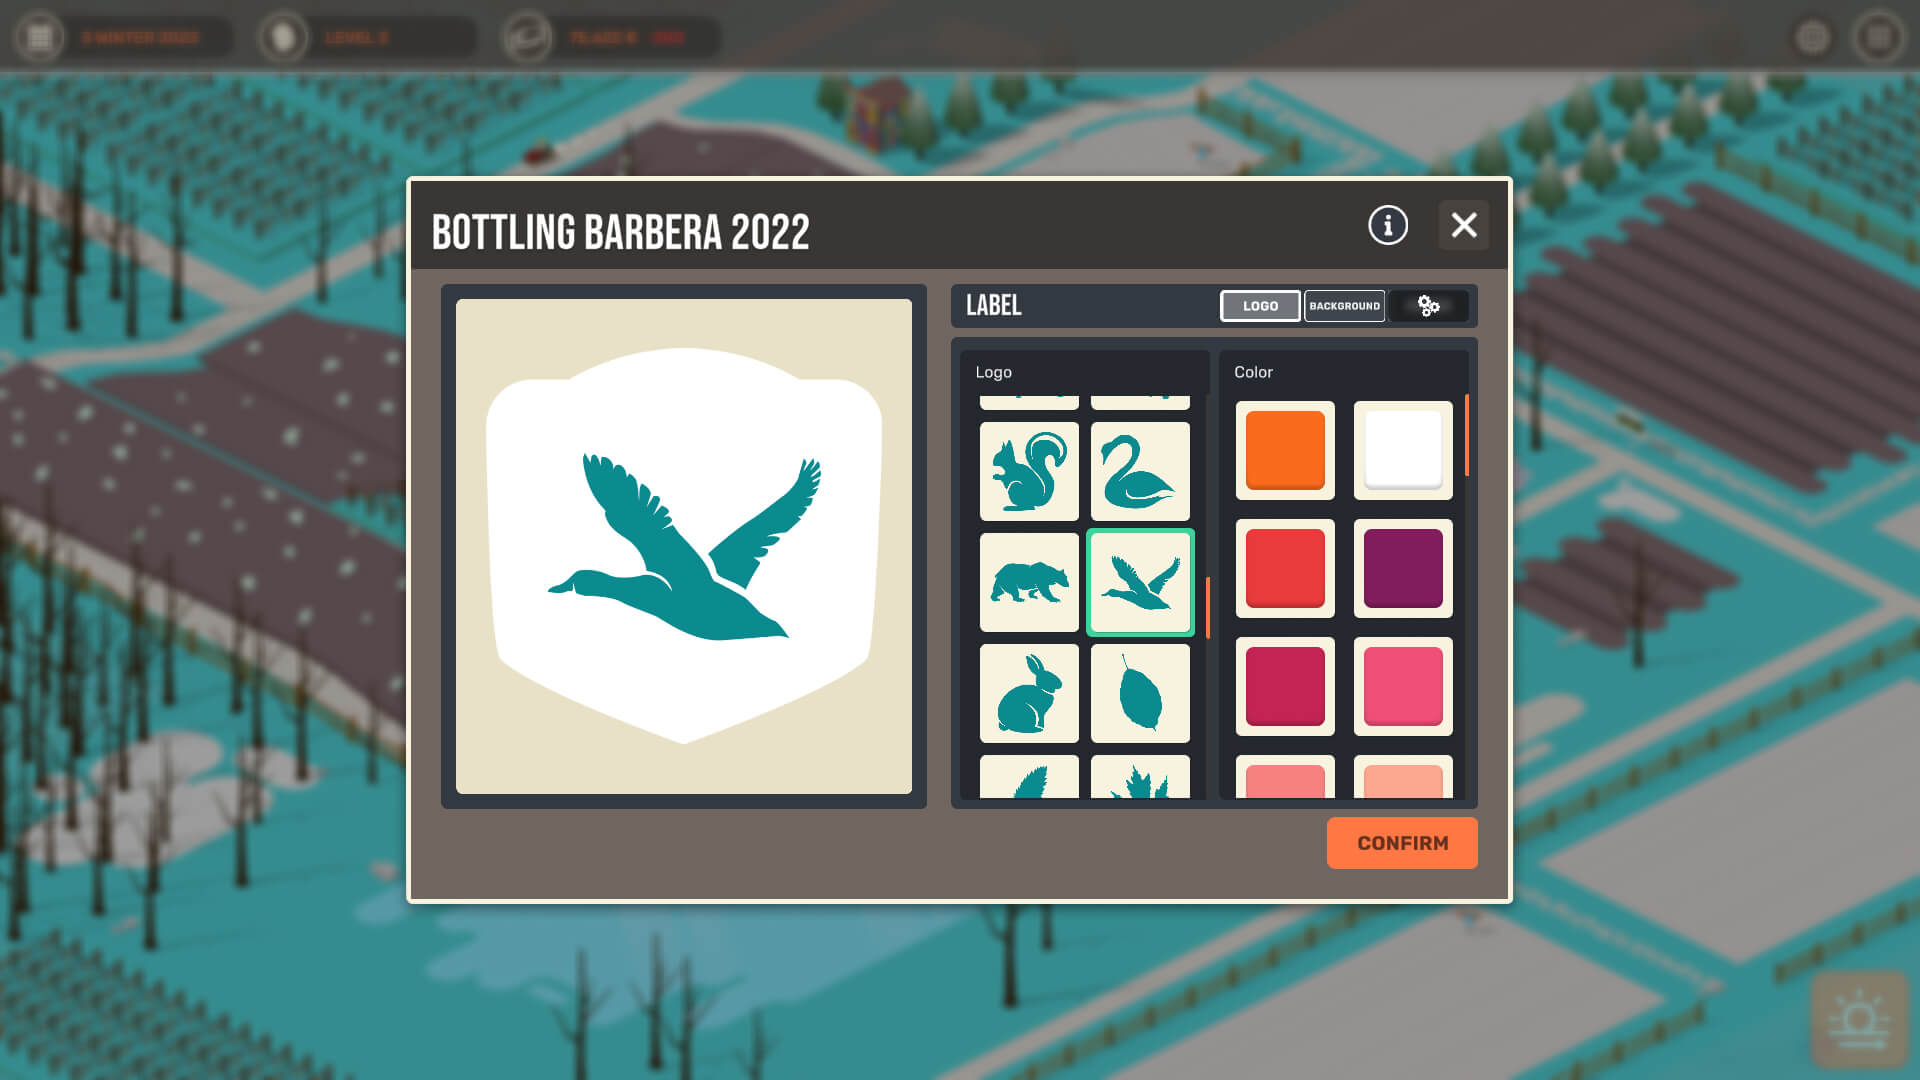 Free Epic Store Games - A screenshot from Hundred Days - Winemaking Simulator, where the player is designing the label for their new Barbera 2022 wine.